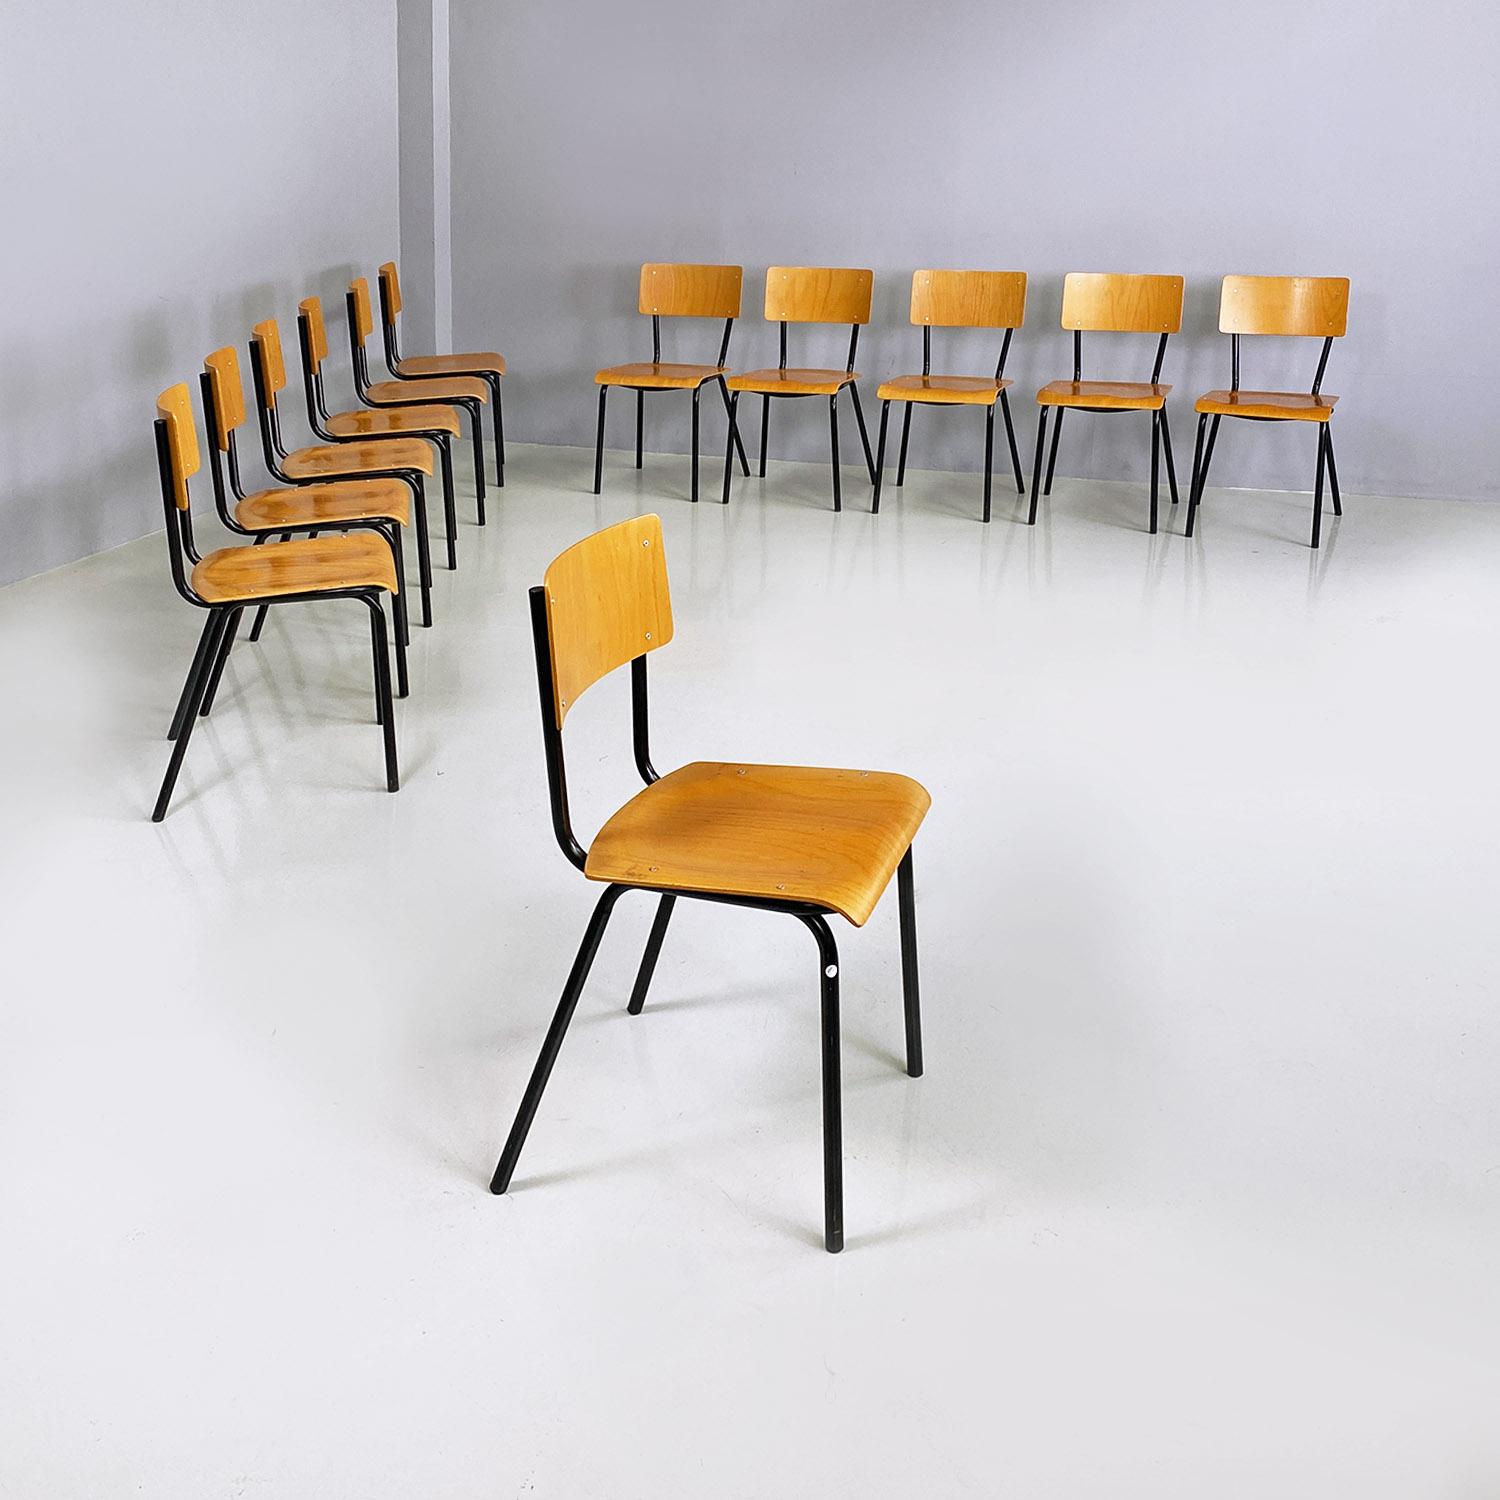 Italian mid-century modern beech and black tubolar metal school chairs, 1960s.
Set of twelve chairs with seat and back in beech wood and black metal rod structure.
1960 approx.
Good condition, several signs of use and age.
Measurements in cm